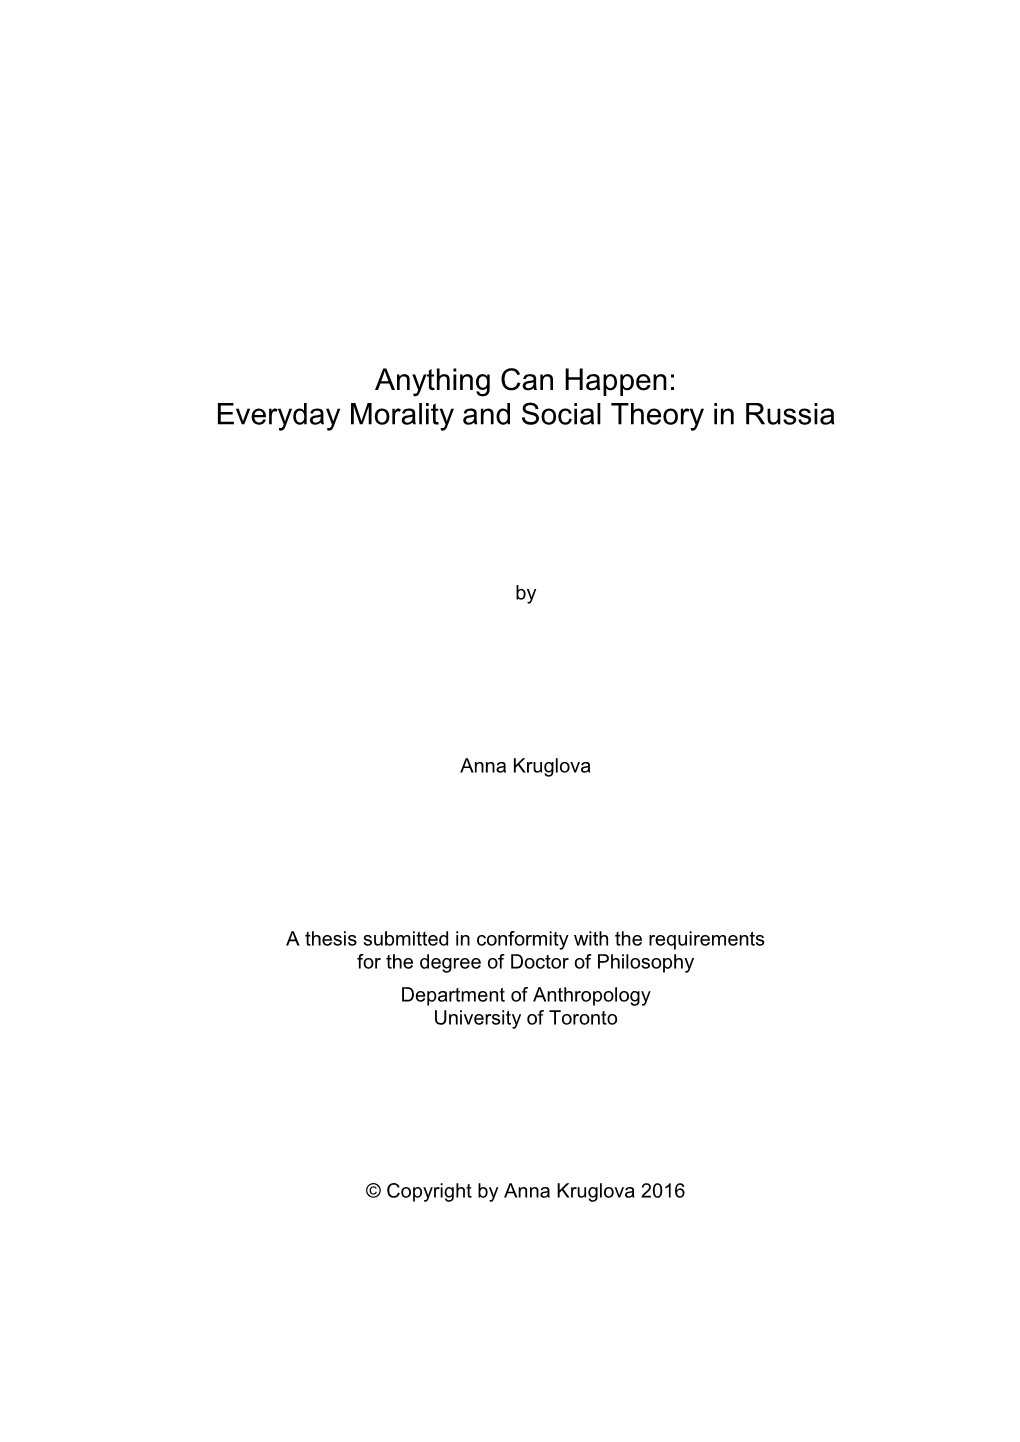 Everyday Morality and Social Theory in Russia